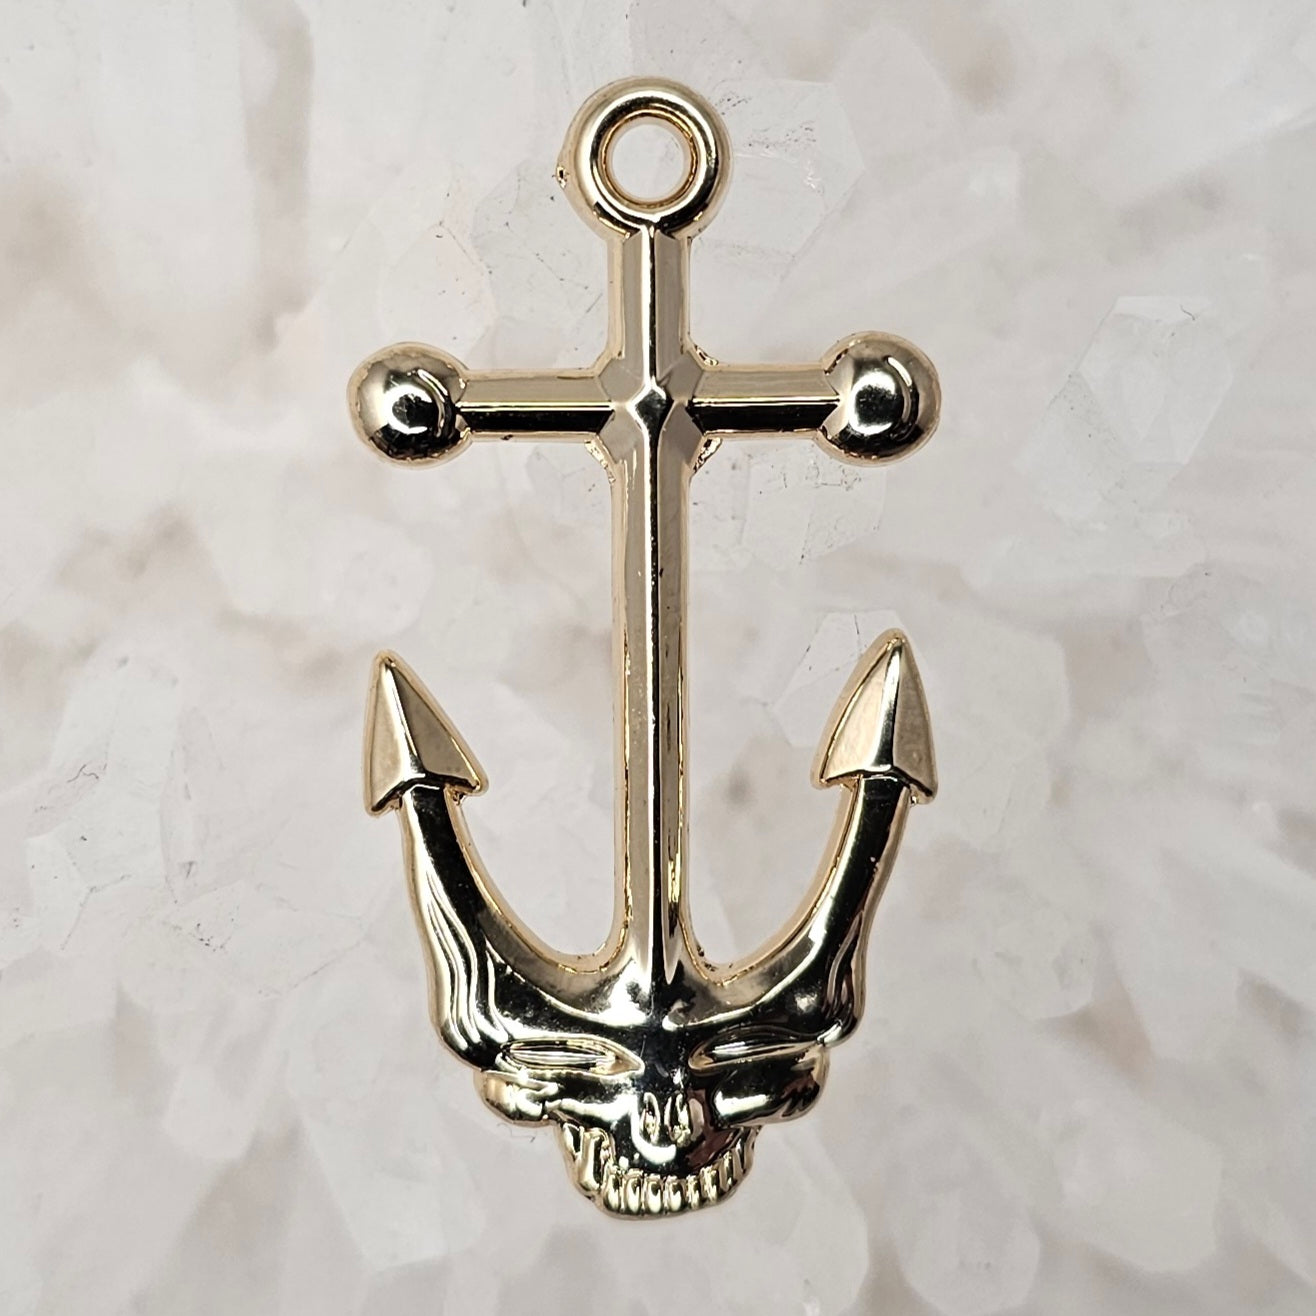 Steal Your Anchor Forever Grateful Sailor Dead Lot Gold 3D Metal Enamel Pins Hat Pins Lapel Pin Brooch Badge Festival Pin